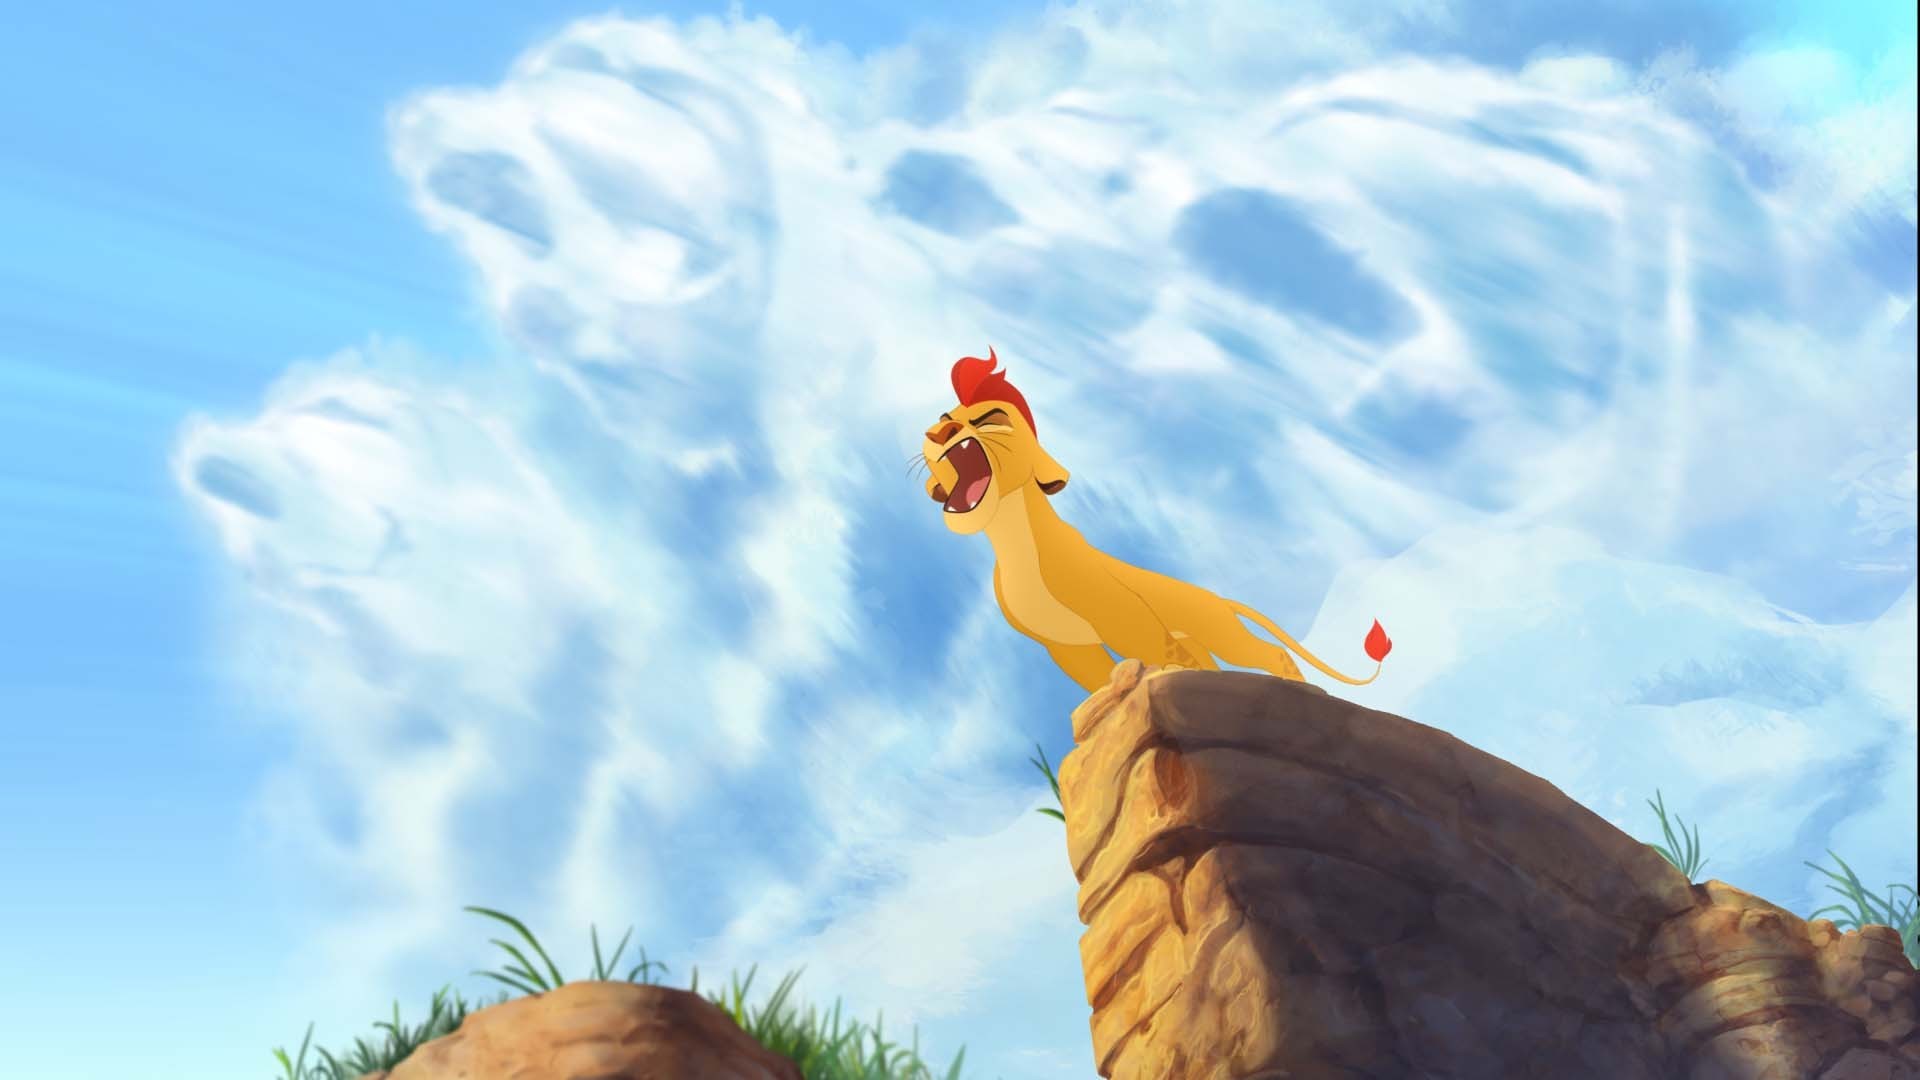 Disney Junior’s Animated Series “The Lion Guard” Premieres Debut January 15, 2016